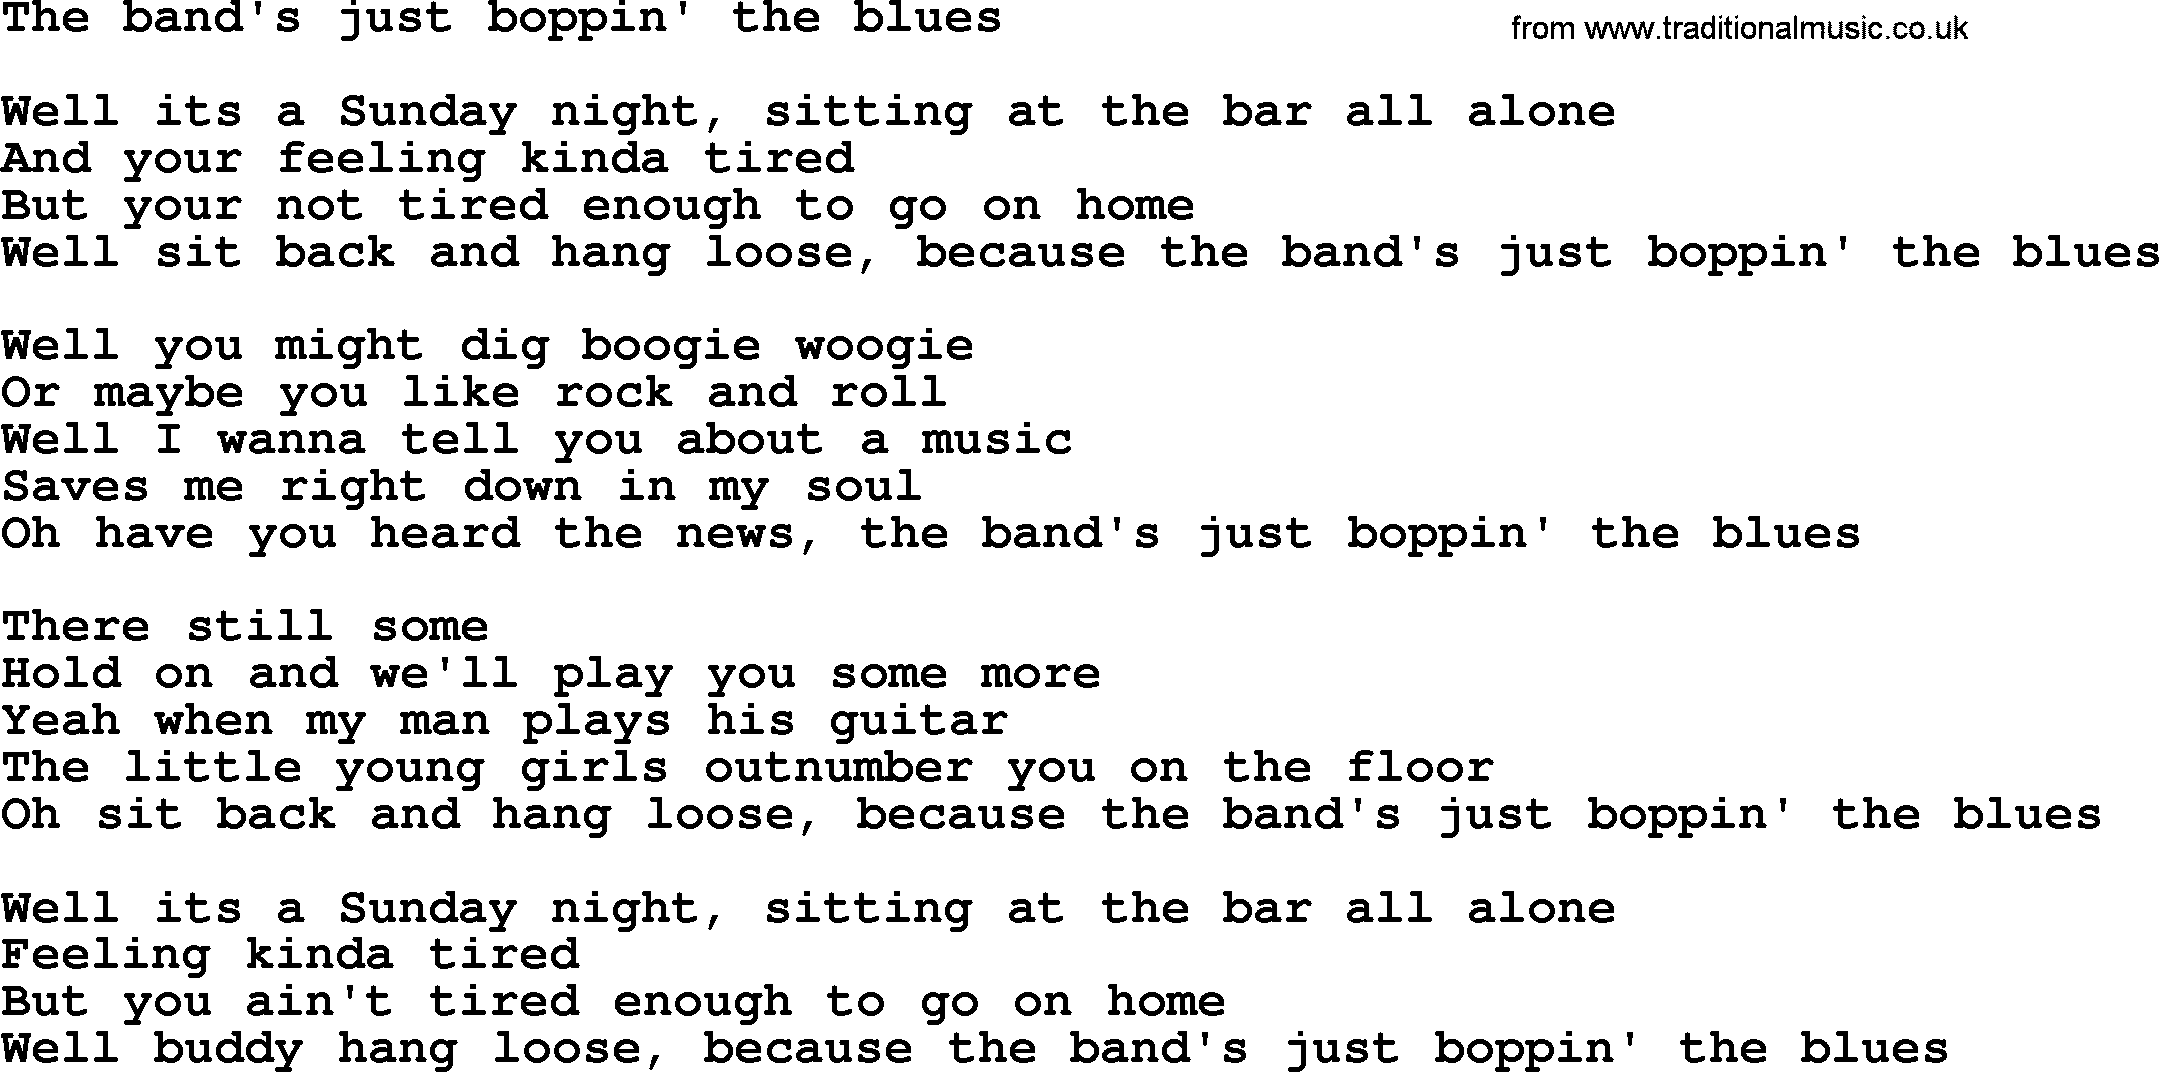 Bruce Springsteen song: The Band's Just Boppin' The Blues lyrics